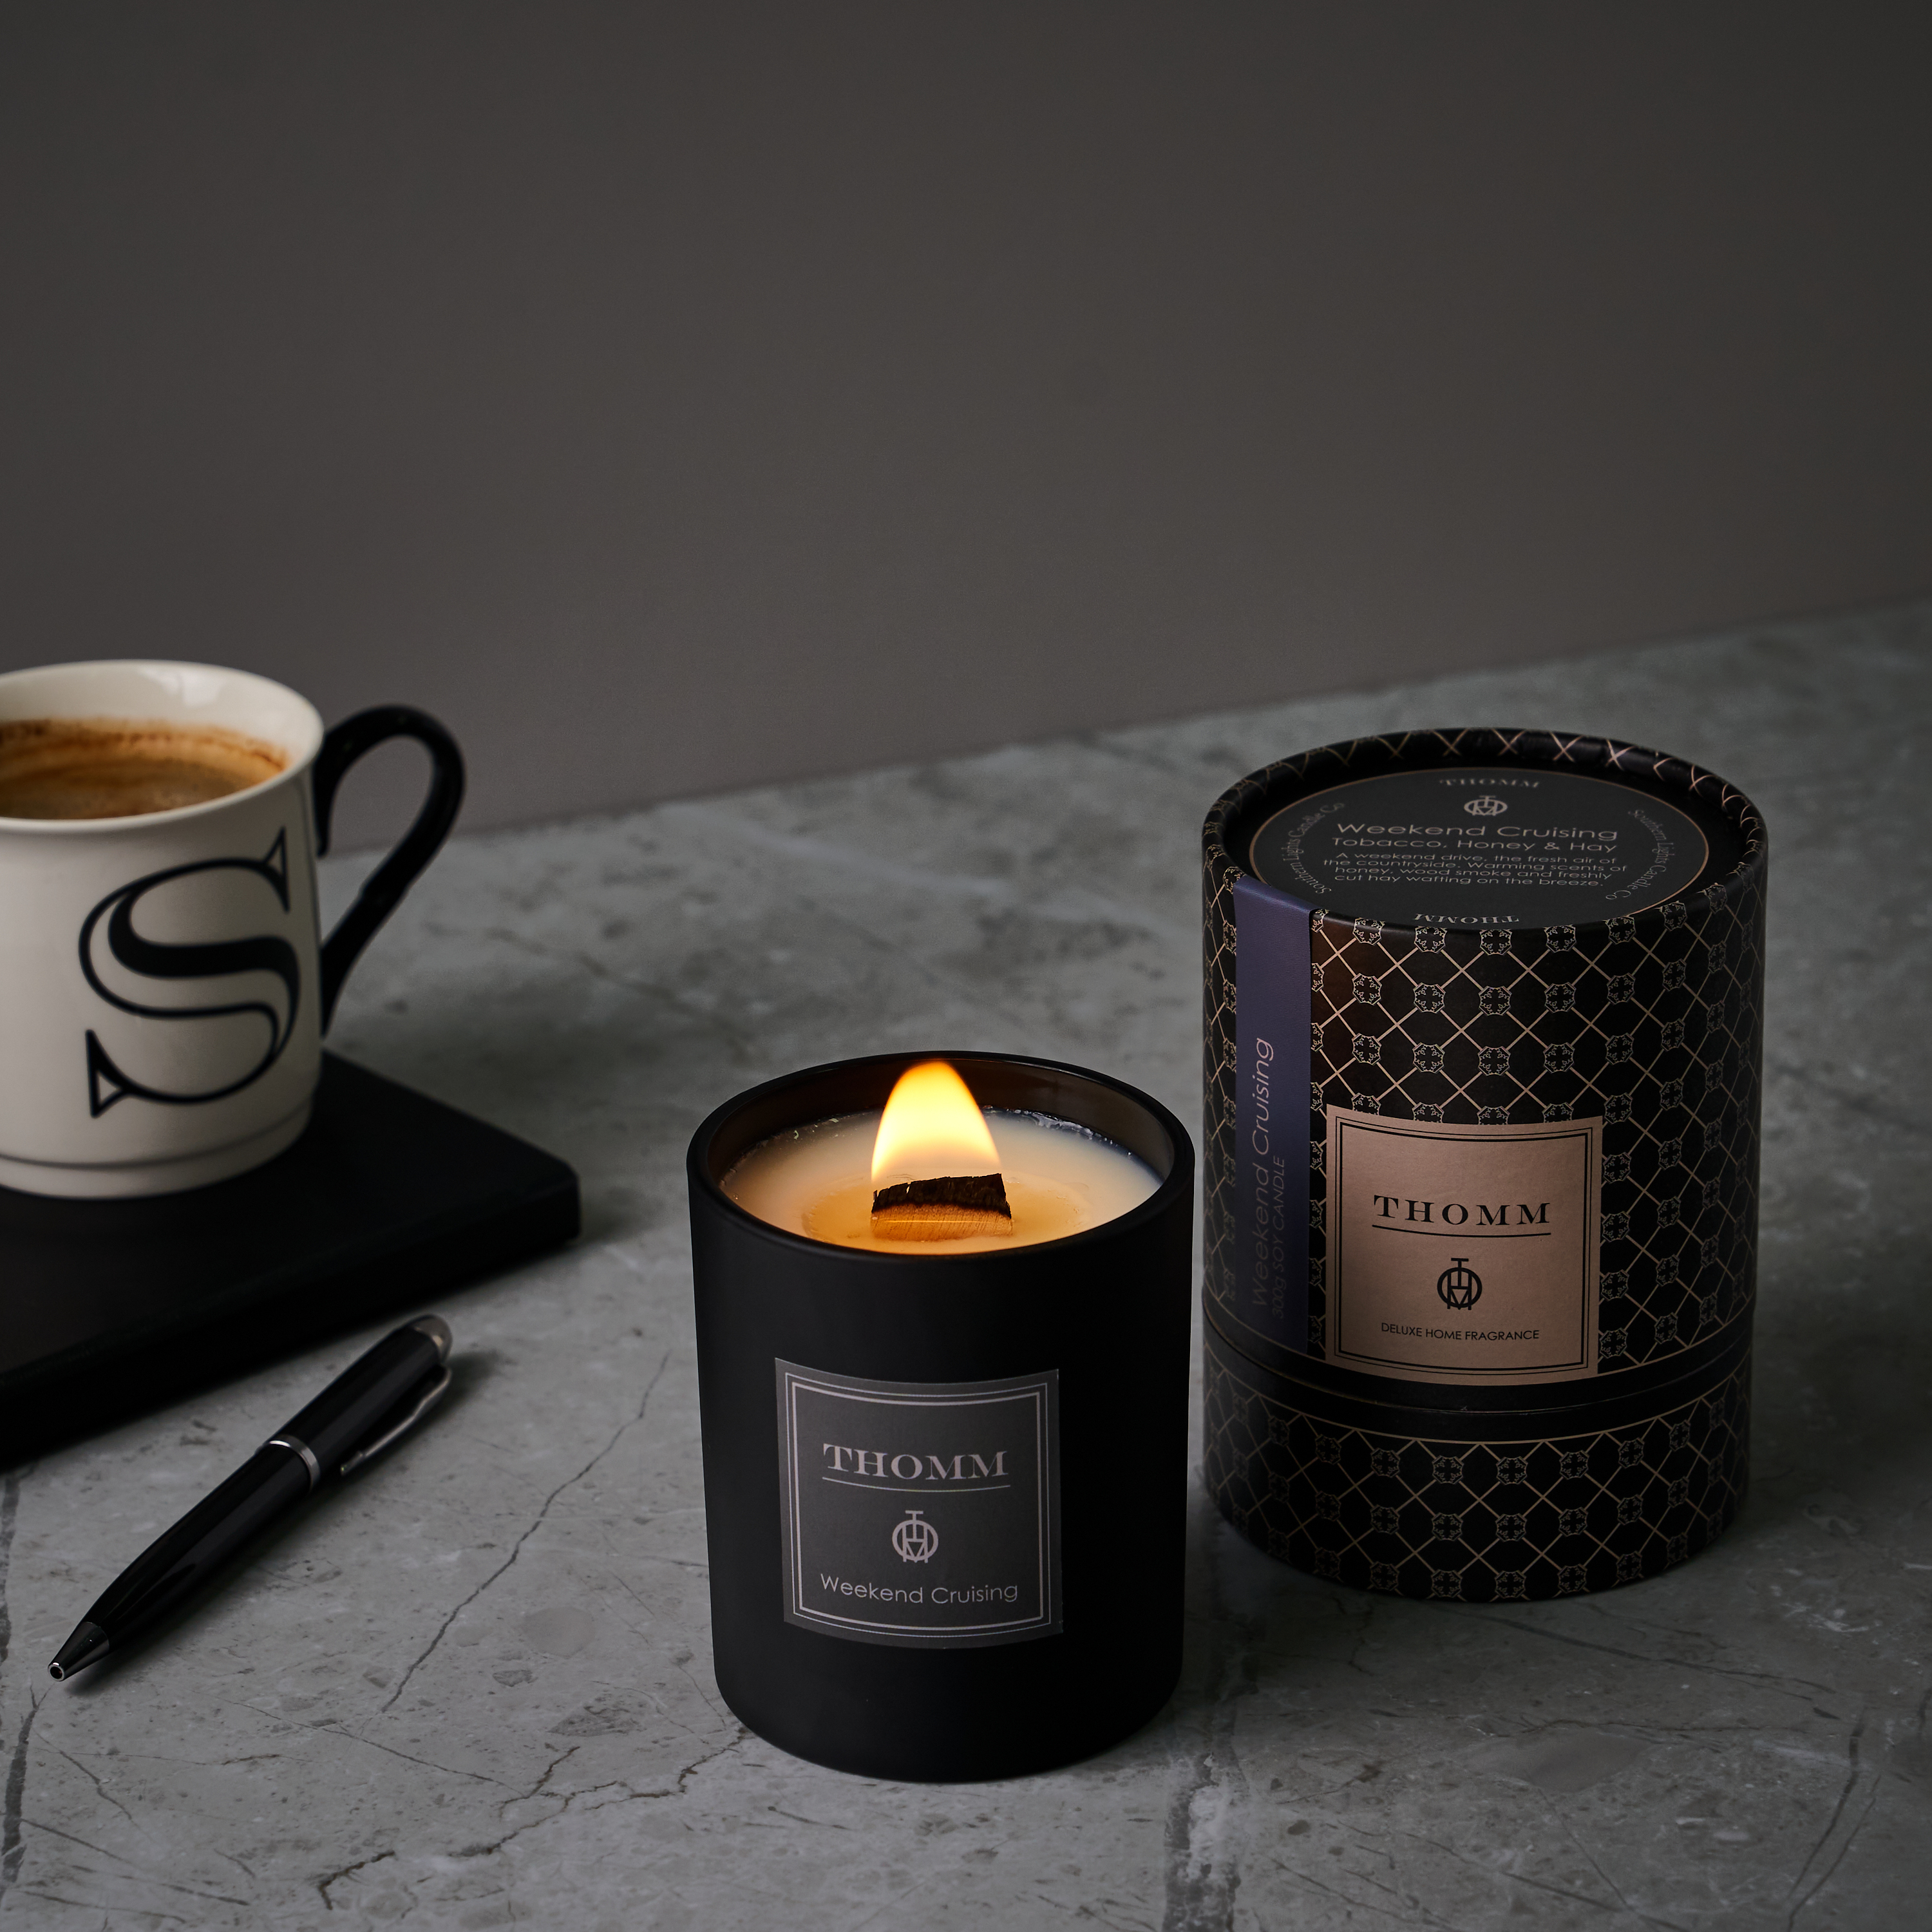 'Weekend Cruising' (Tobacco, Honey & Hay) - 300g Soy Candle